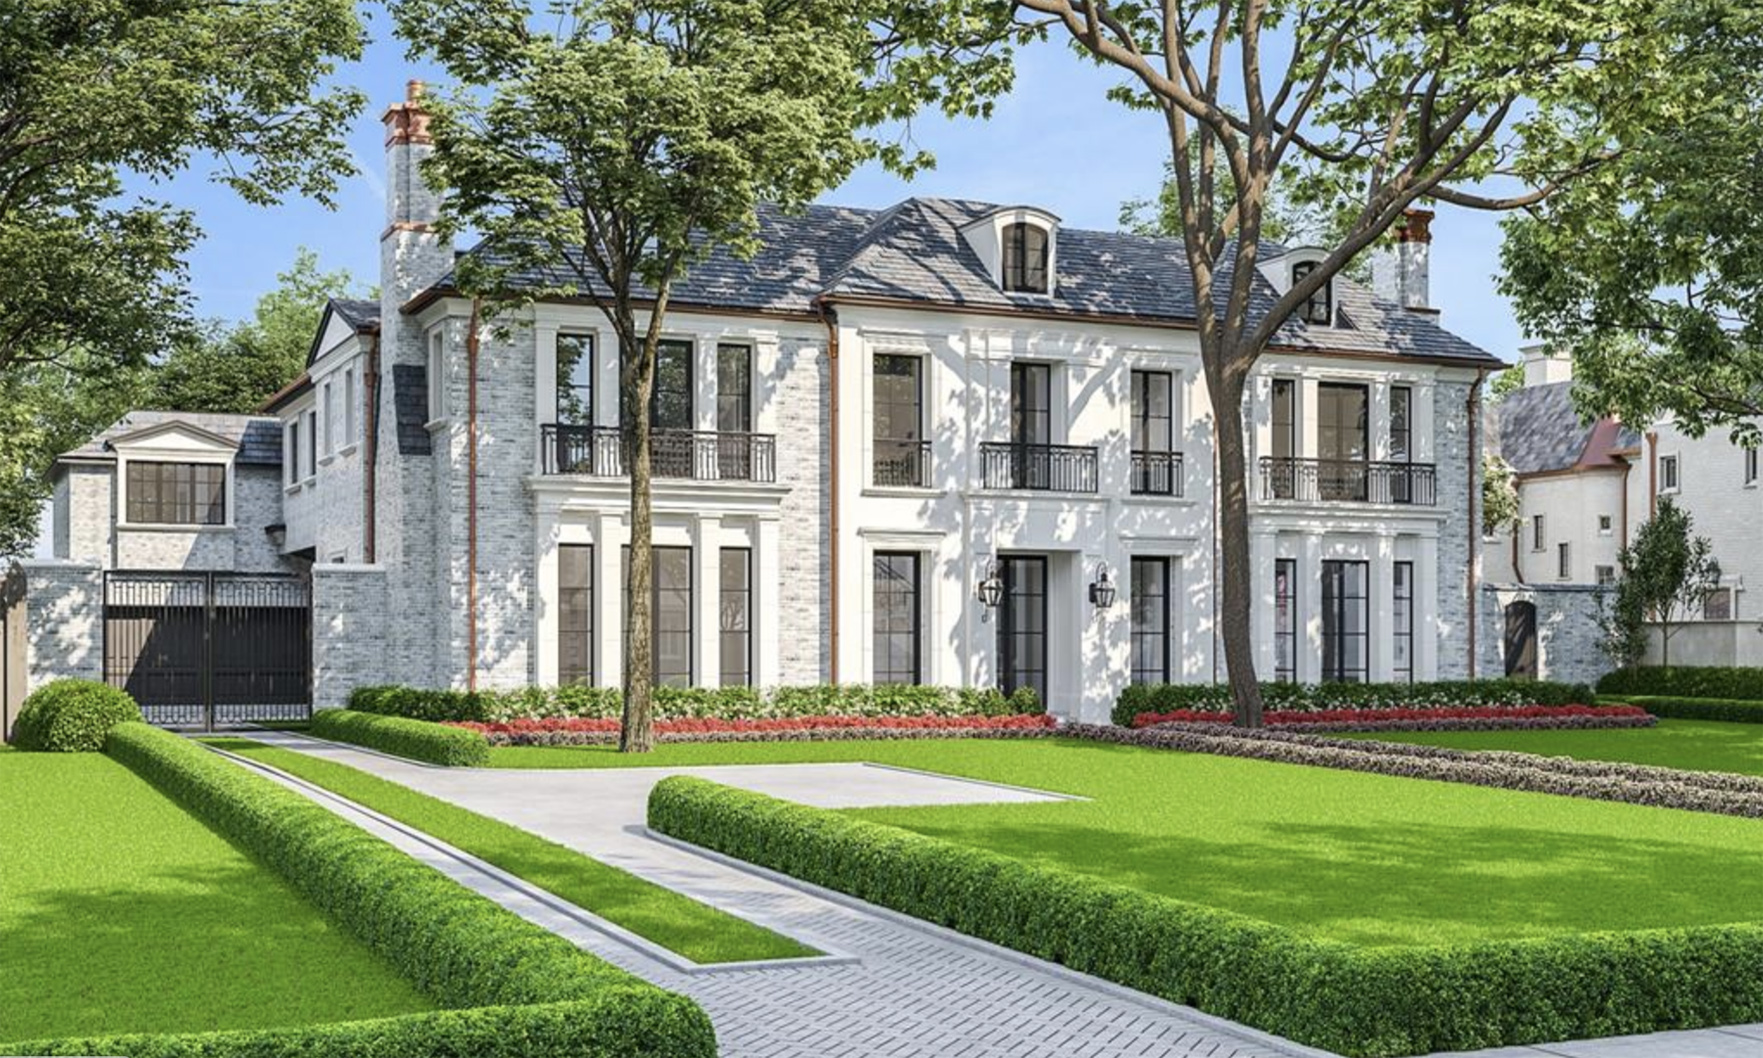 Top 10 most expensive Houston homes sold in July